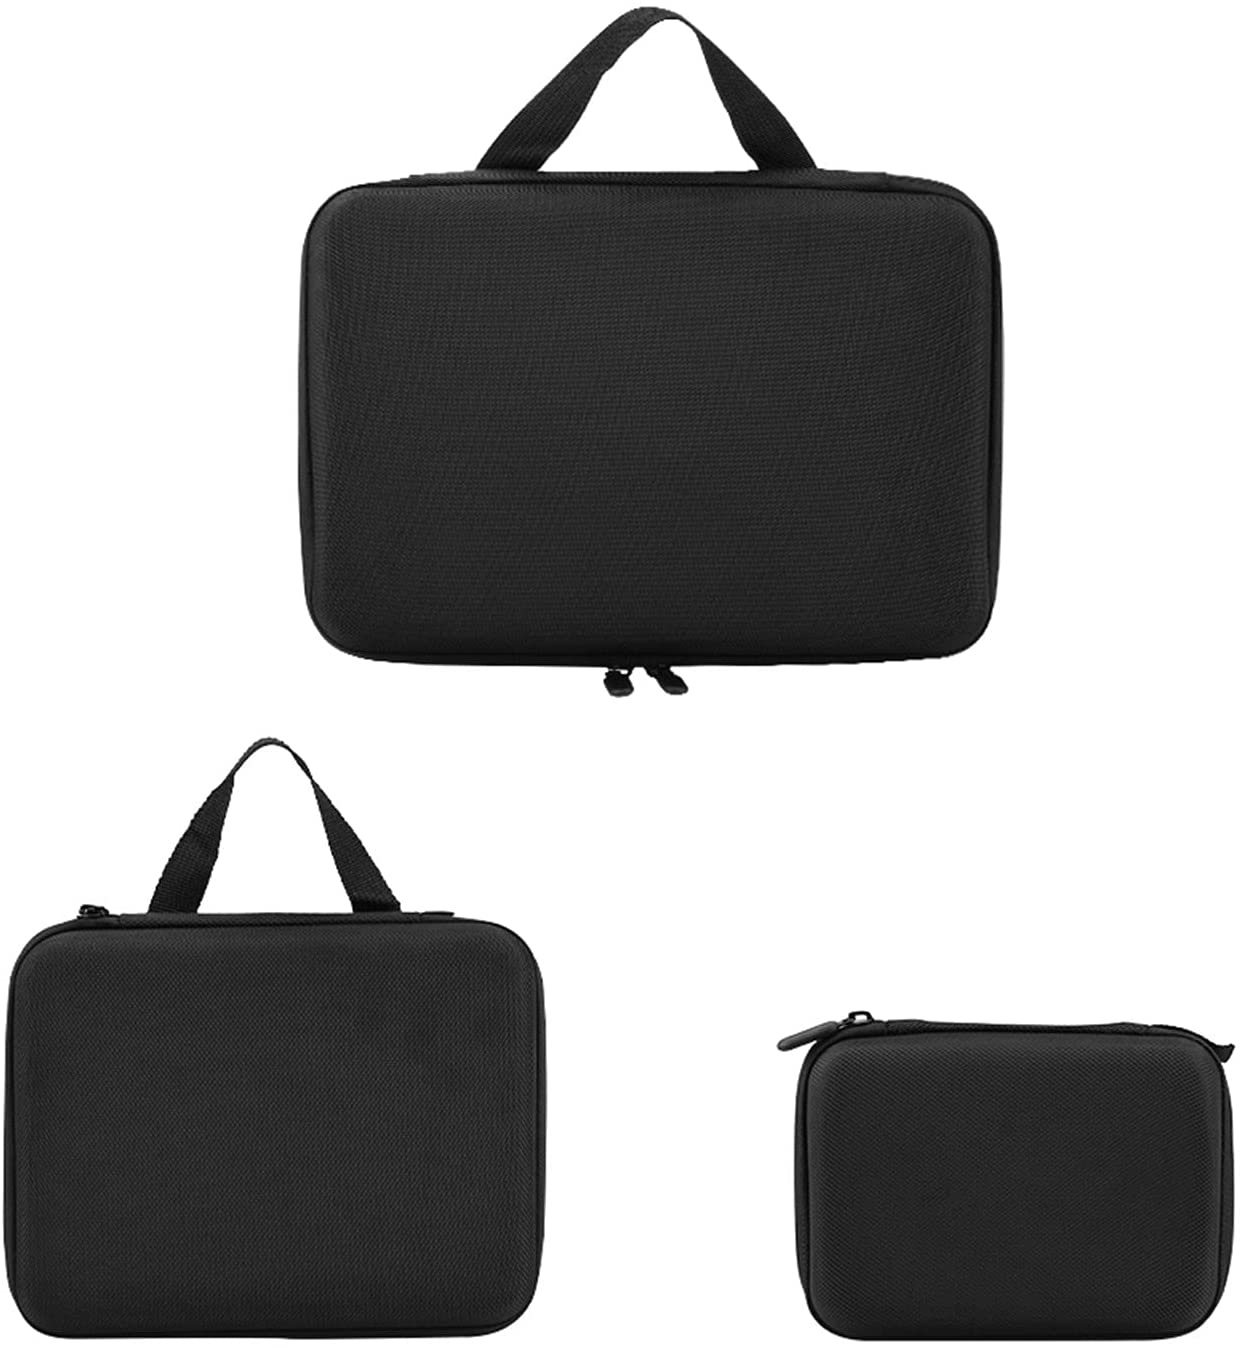 Universal Carrying Bag Hard Case Storage Travel Box For Headphone & Cables.